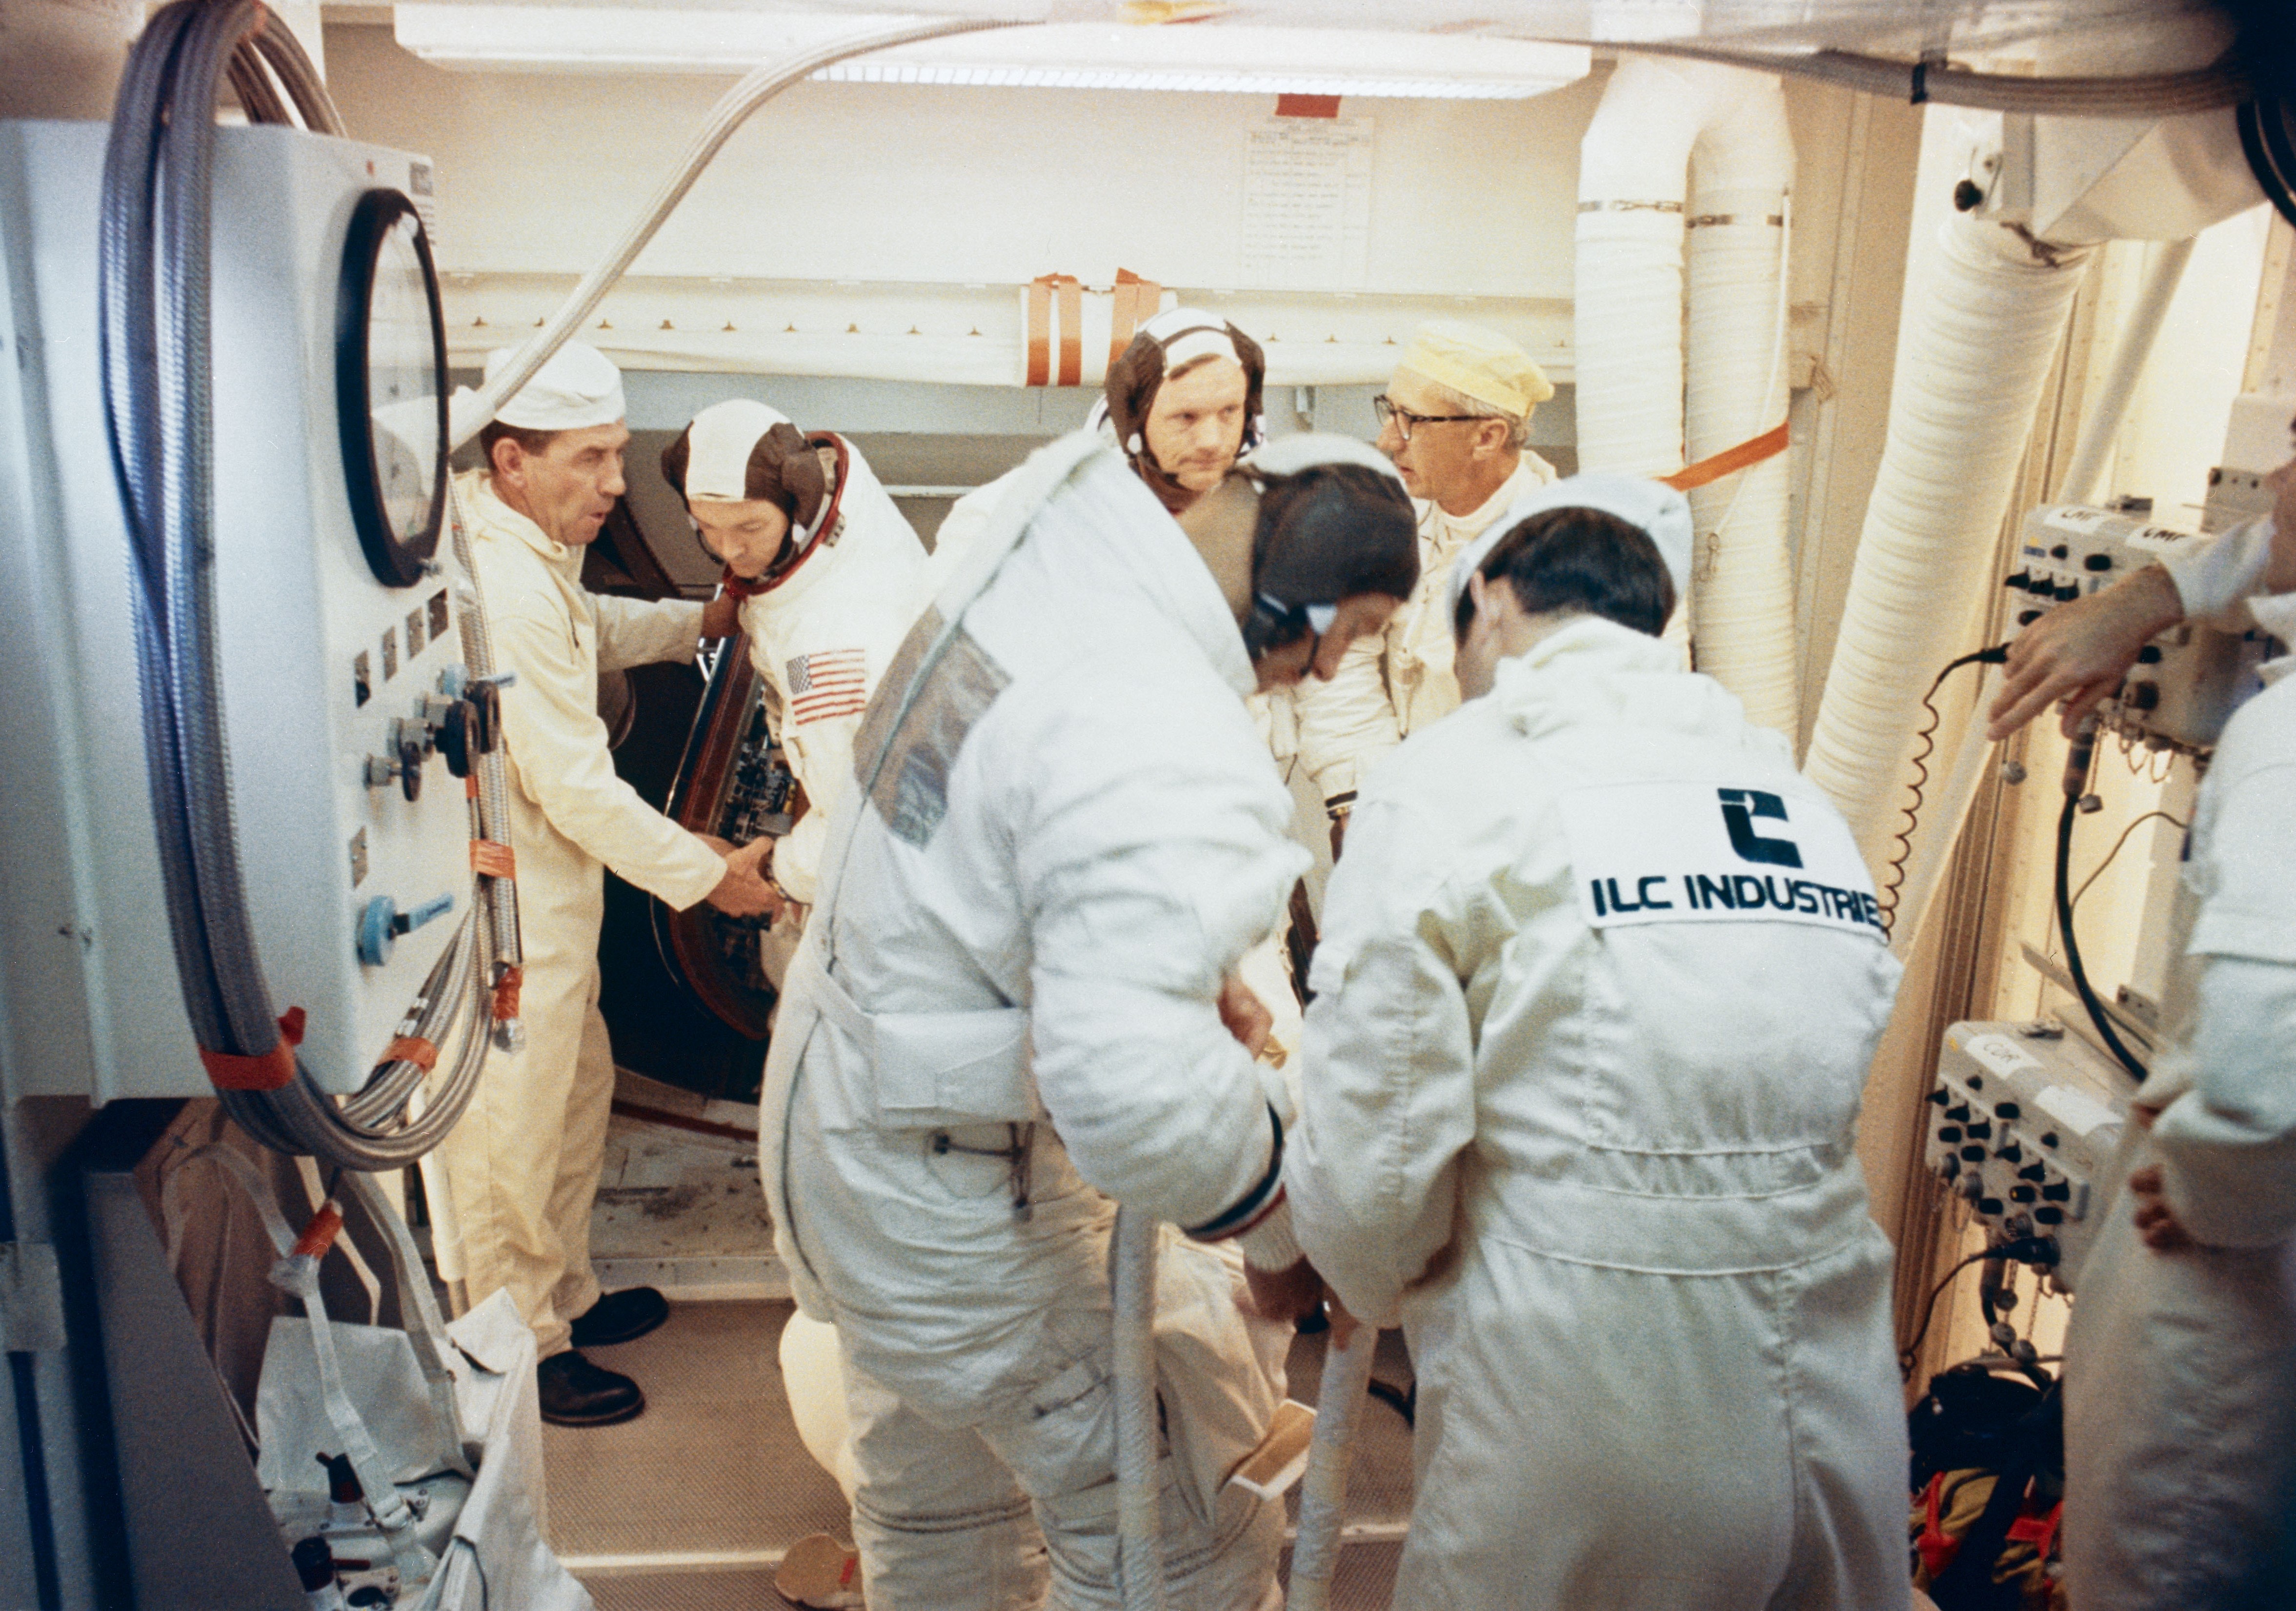 Workers in the White Room assist Collins, left, Armstrong, and Aldrin to enter their spacecraft for the CDDT